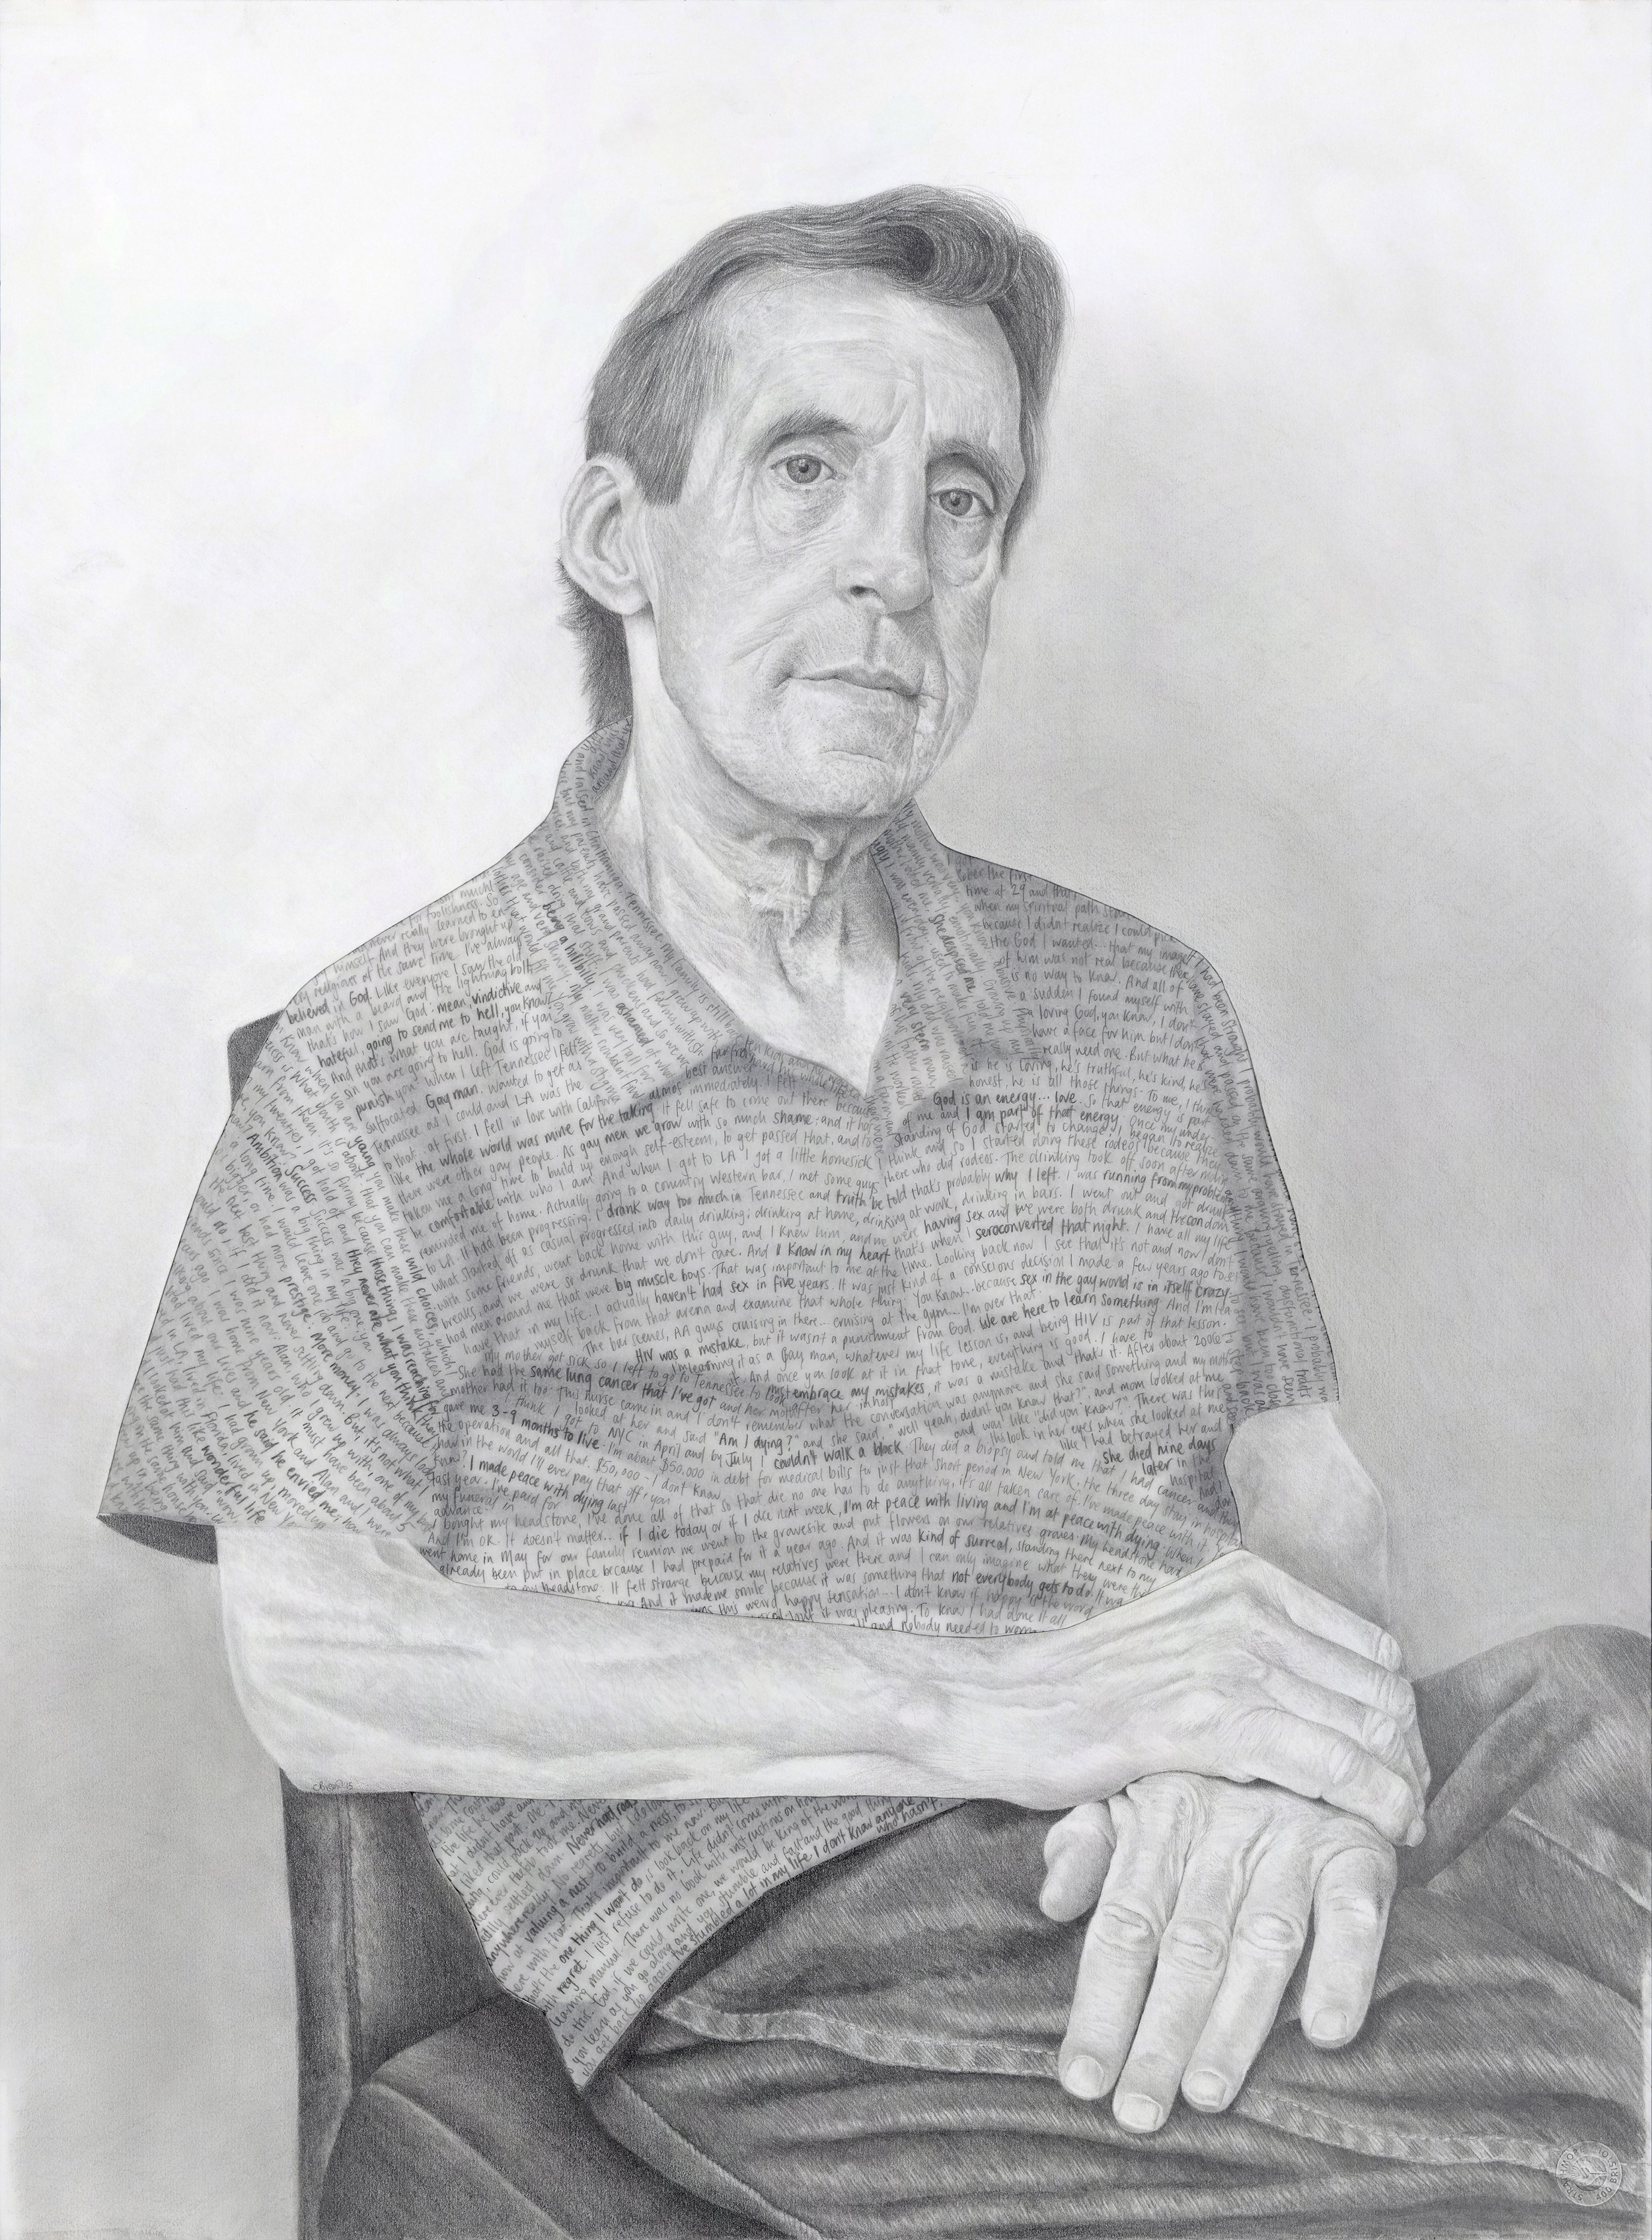 Randy - Pencil on drawing and tissue papers - 30" x 22" - 2015